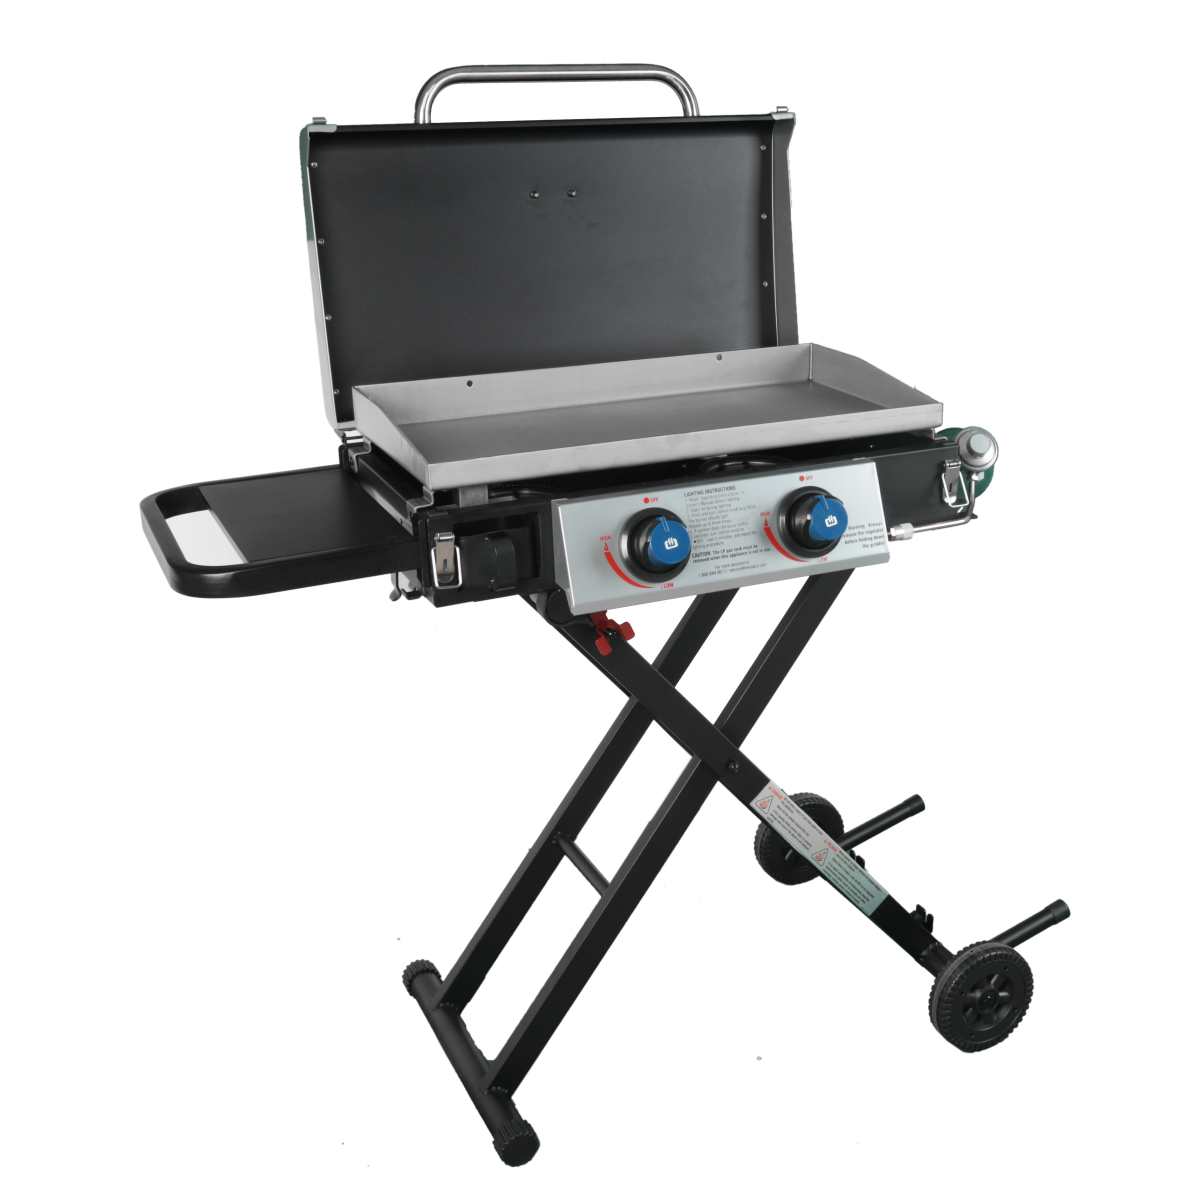 Folding Portable Two Burner Cast Iron 150,000 BTU Stove with Stainless Steel  Griddle Plancha Comal Camping Tailgating Boating 